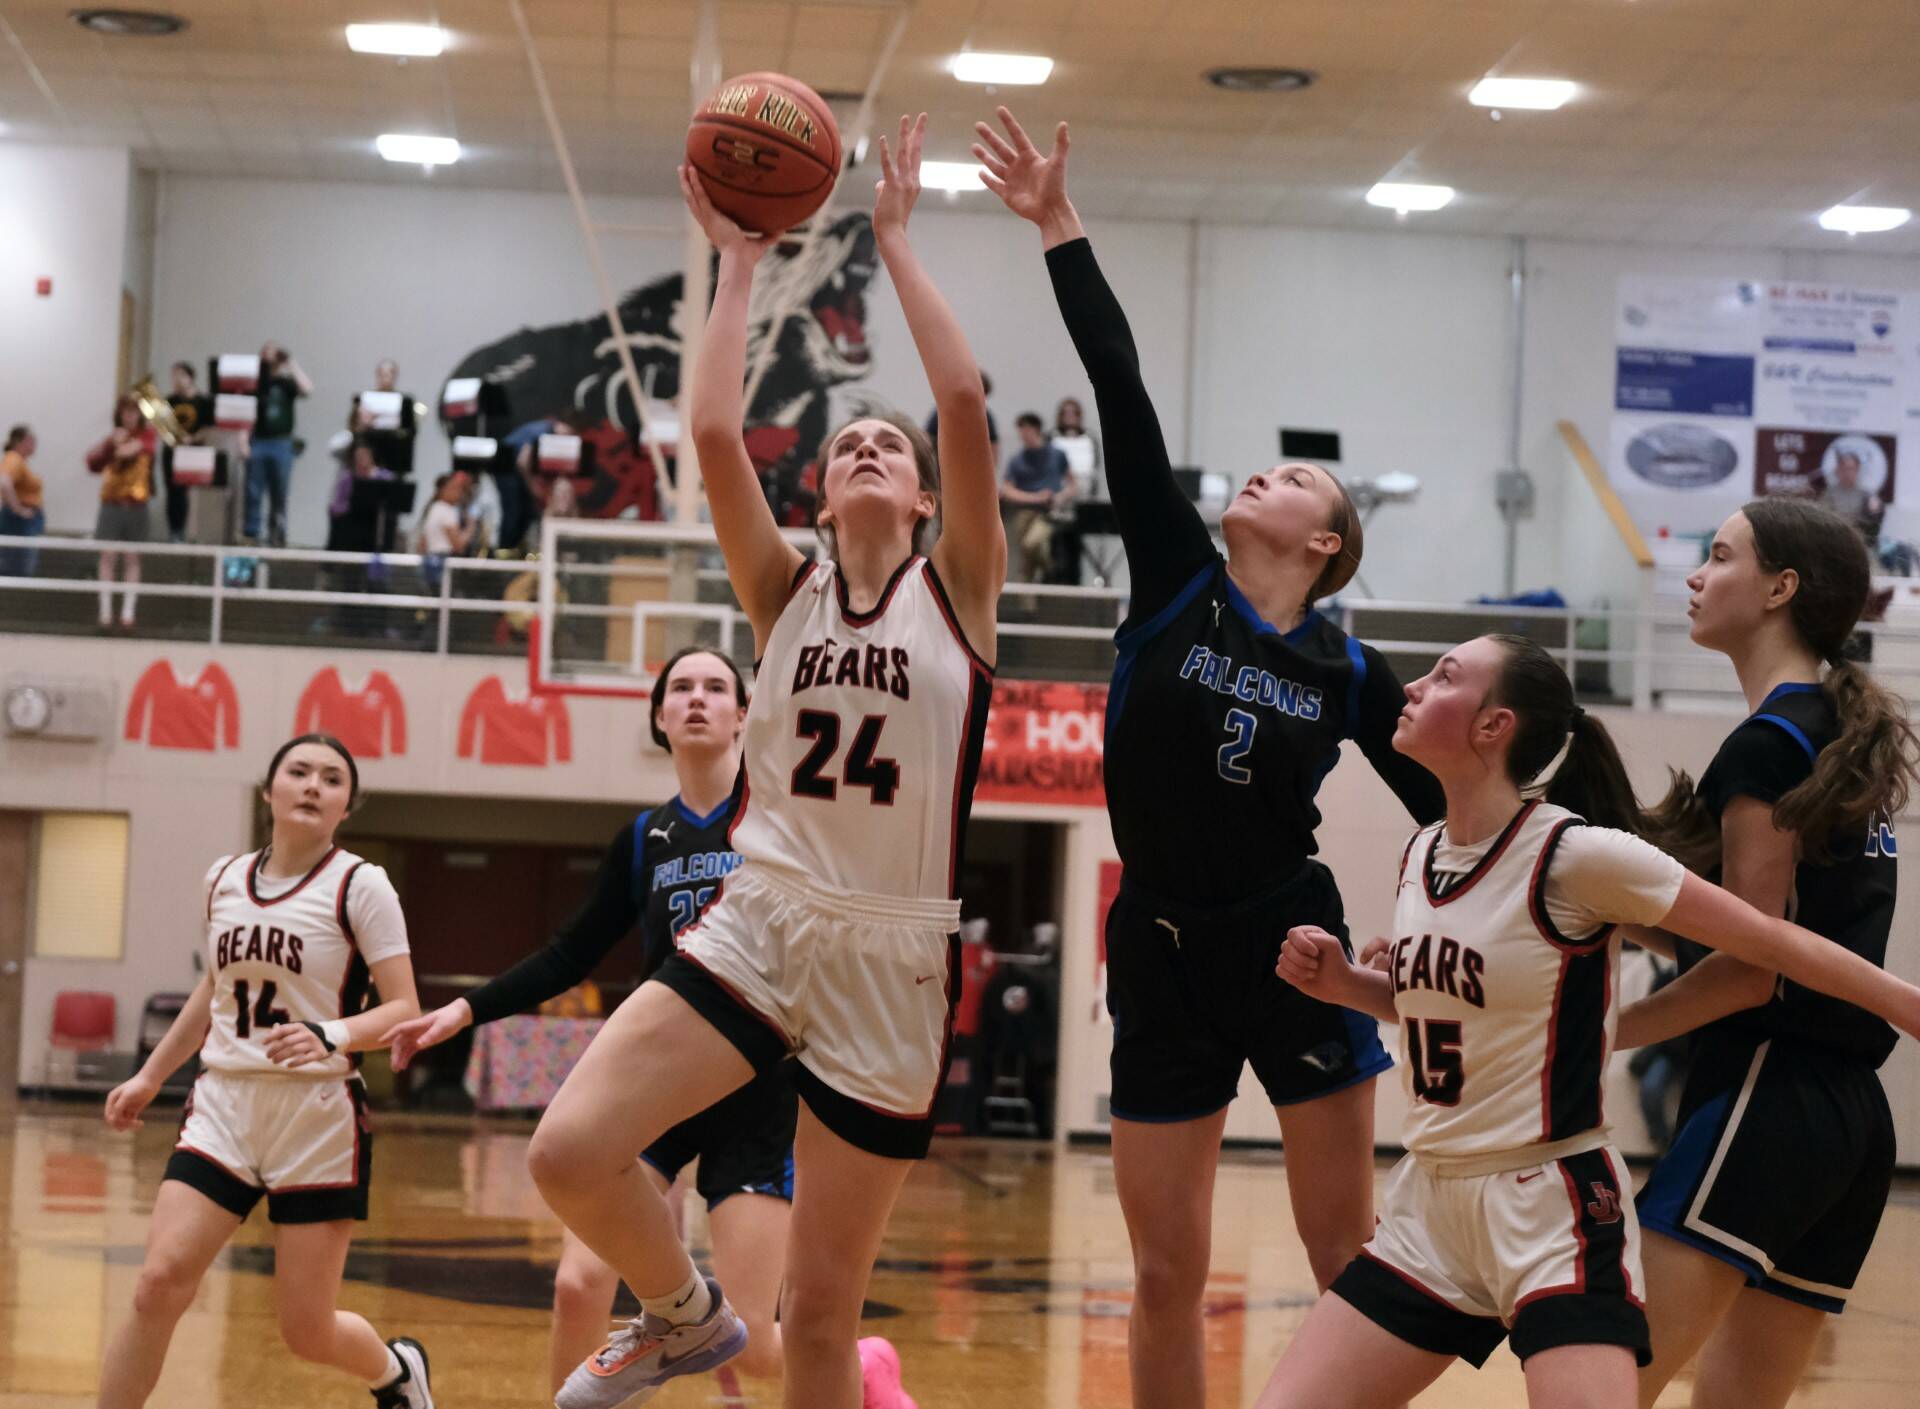 Juneau-Douglas High School: Yadaa.at Kalé senior Mila Hargrave (24) shoots under pressure from Thunder Mountain High School senior Ashlyn Gates (2) as JDHS sophomore Gwen Nizich (15) blocks out TMHS junior Cailynn Baxter (23) during the Crimson Bears 42-28 loss to the Falcons on Saturday at the George Houston Gymnasium. (Klas Stolpe/For the Juneau Empire)